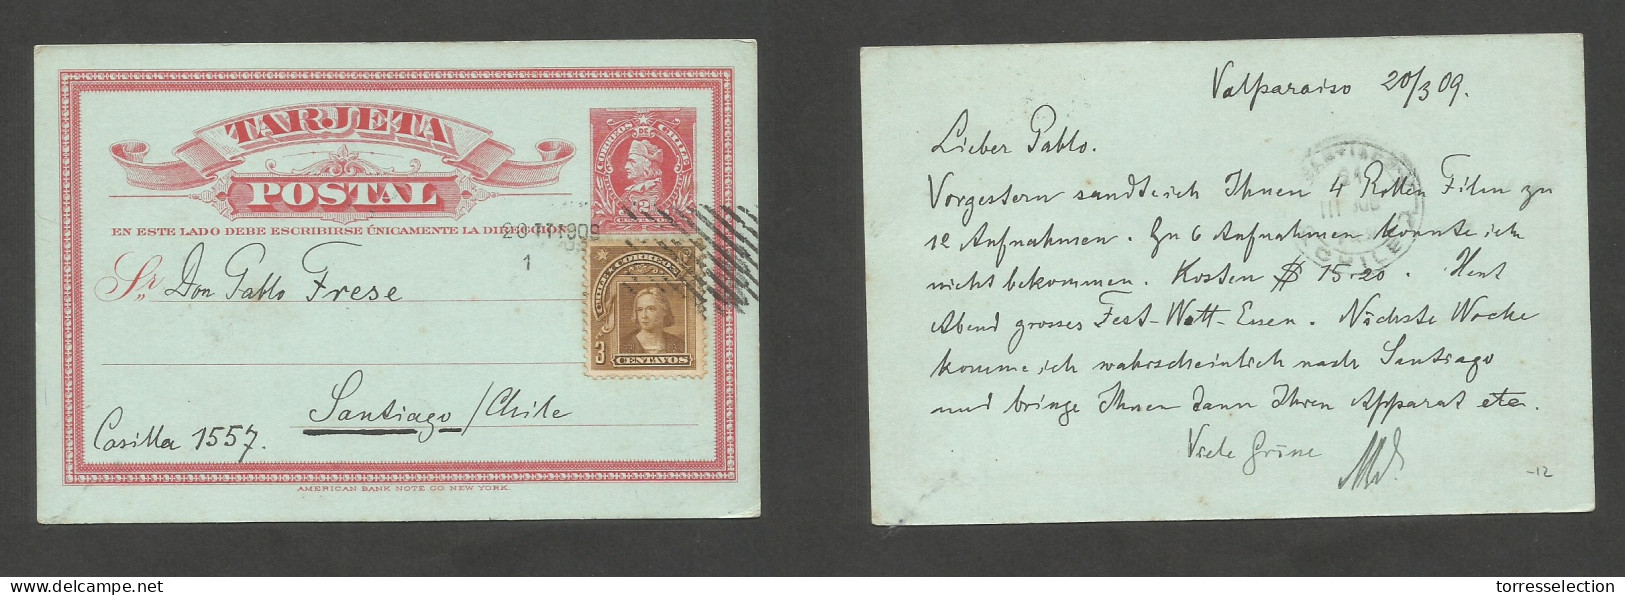 CHILE - Stationery. 1909 (20 March) Valp - Stgo. 2c Red Stat Card + 3c Brown Adtl, Tied Rolling Grill. Nice Item. SALE. - Cile